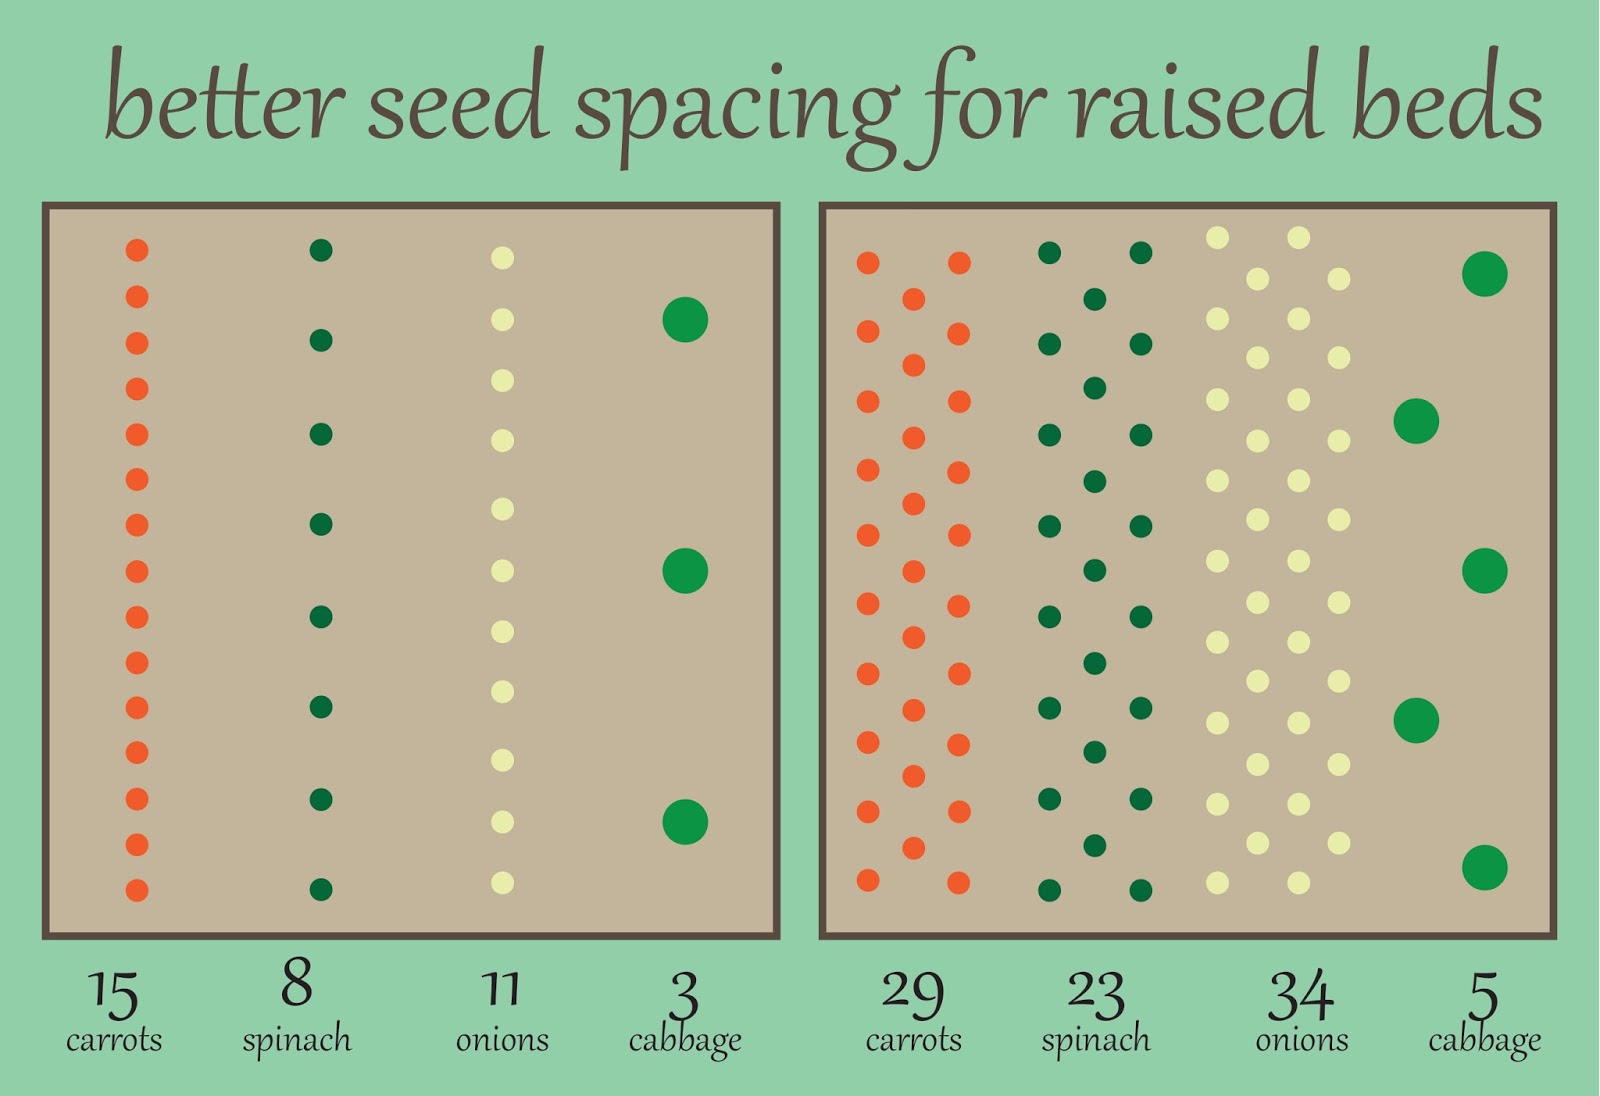 #AtHomeWithNicole: Seed Spacing in the Home Garden